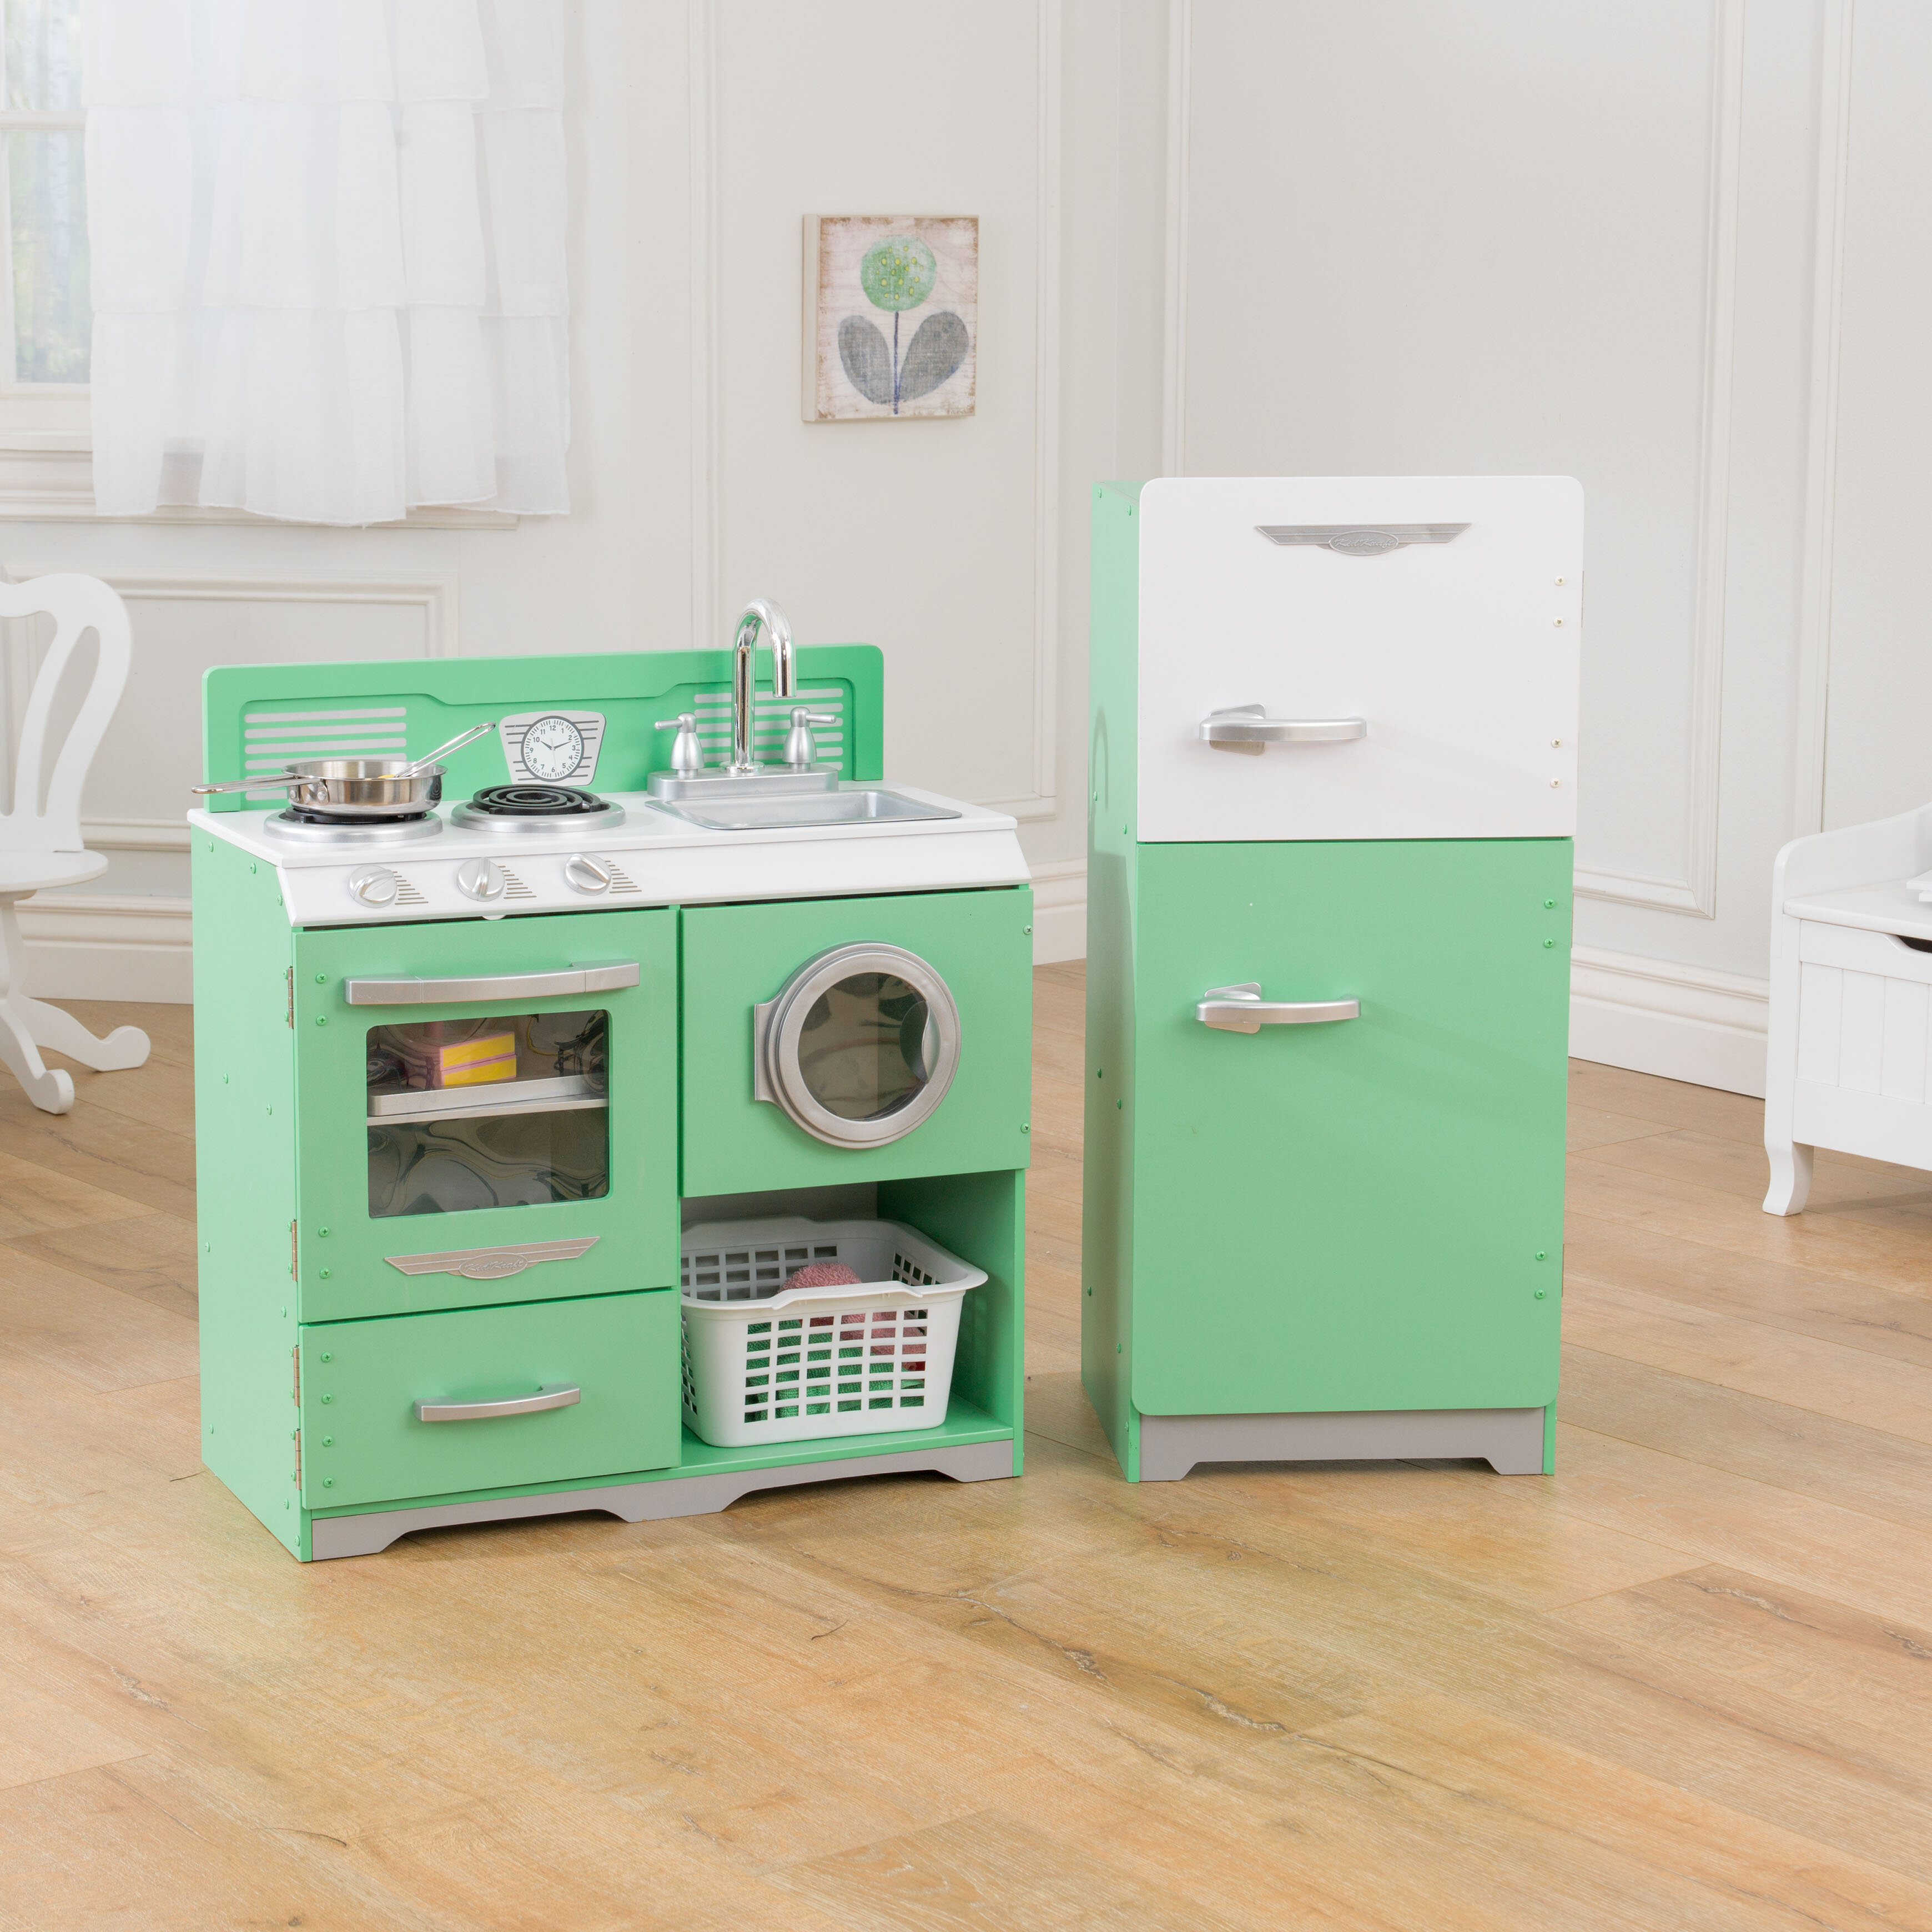 [BIG SALE] Best-Selling Play Kitchen Sets You’ll Love In 2022 | Wayfair